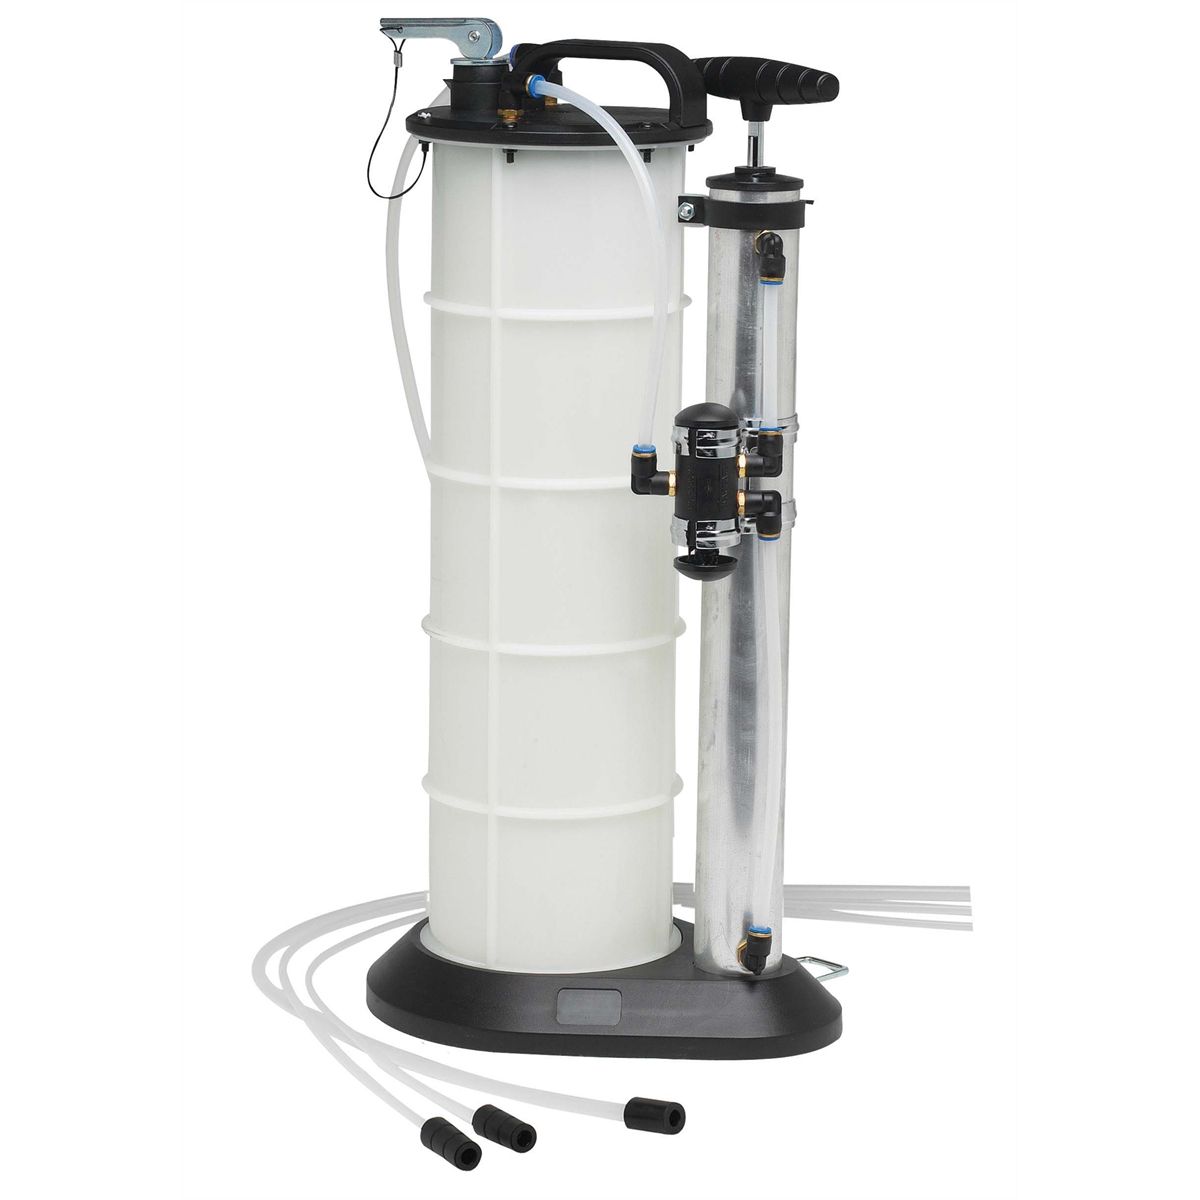 Mityvac MV7201 Manually Operated Fluid Extractor Evacuator & Dispenser for sale online 